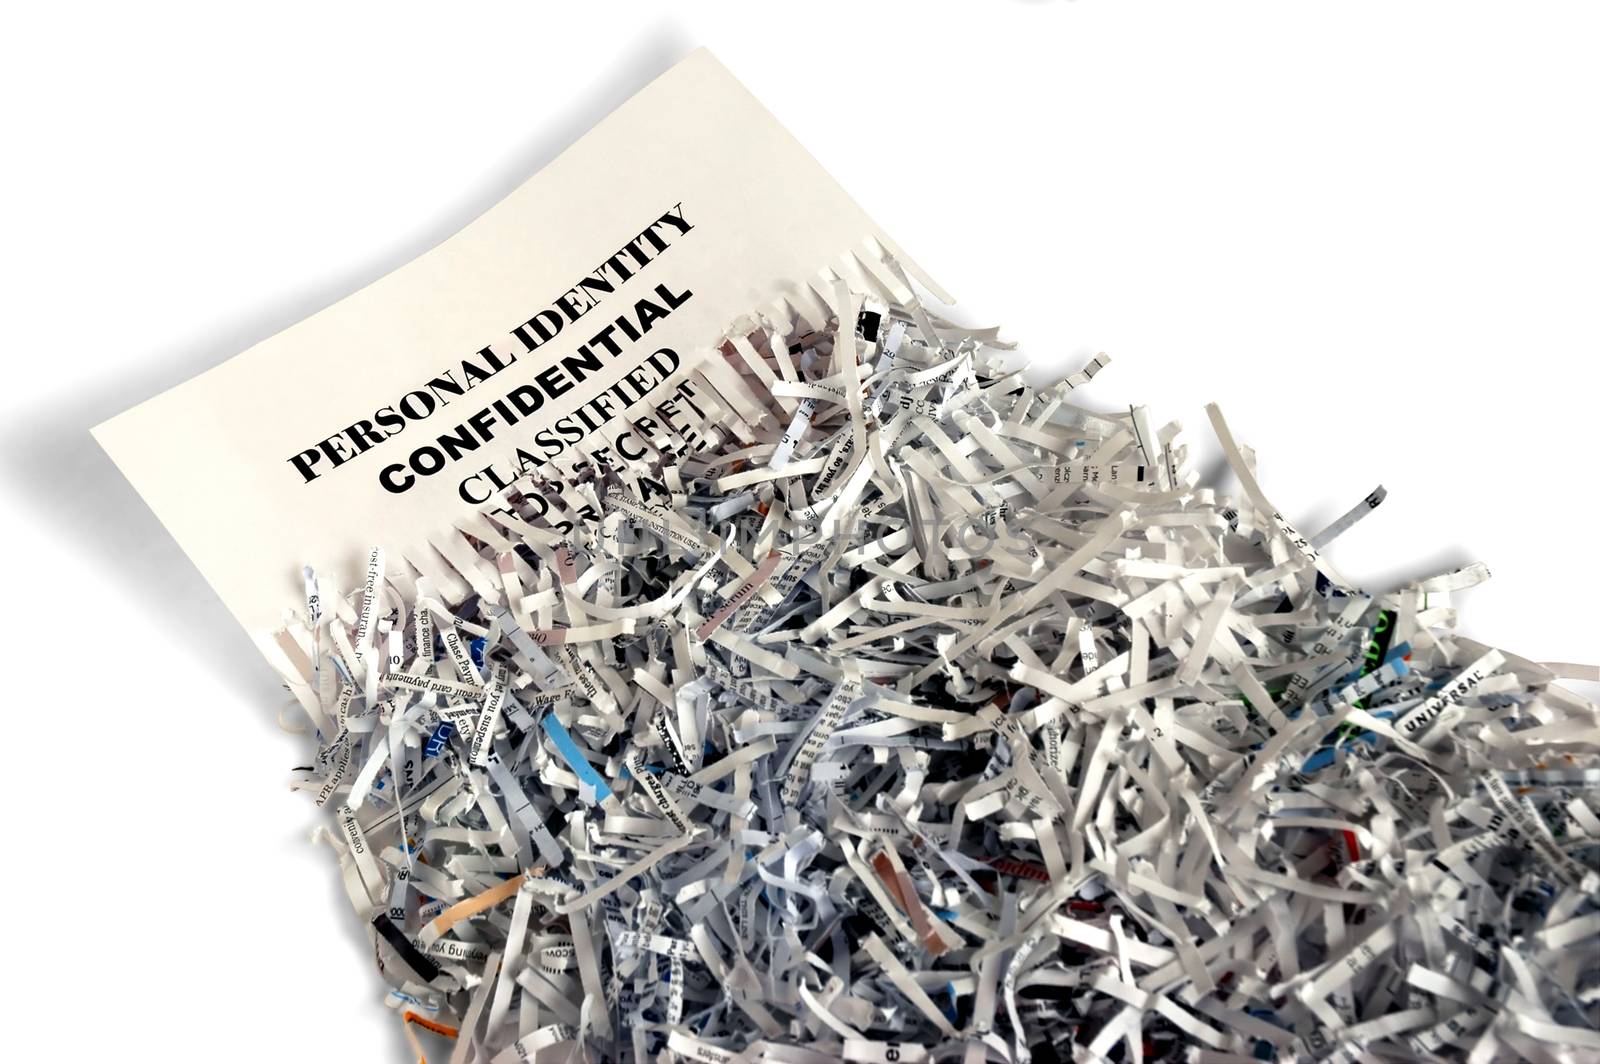 Shredded paper depicting privacy protection